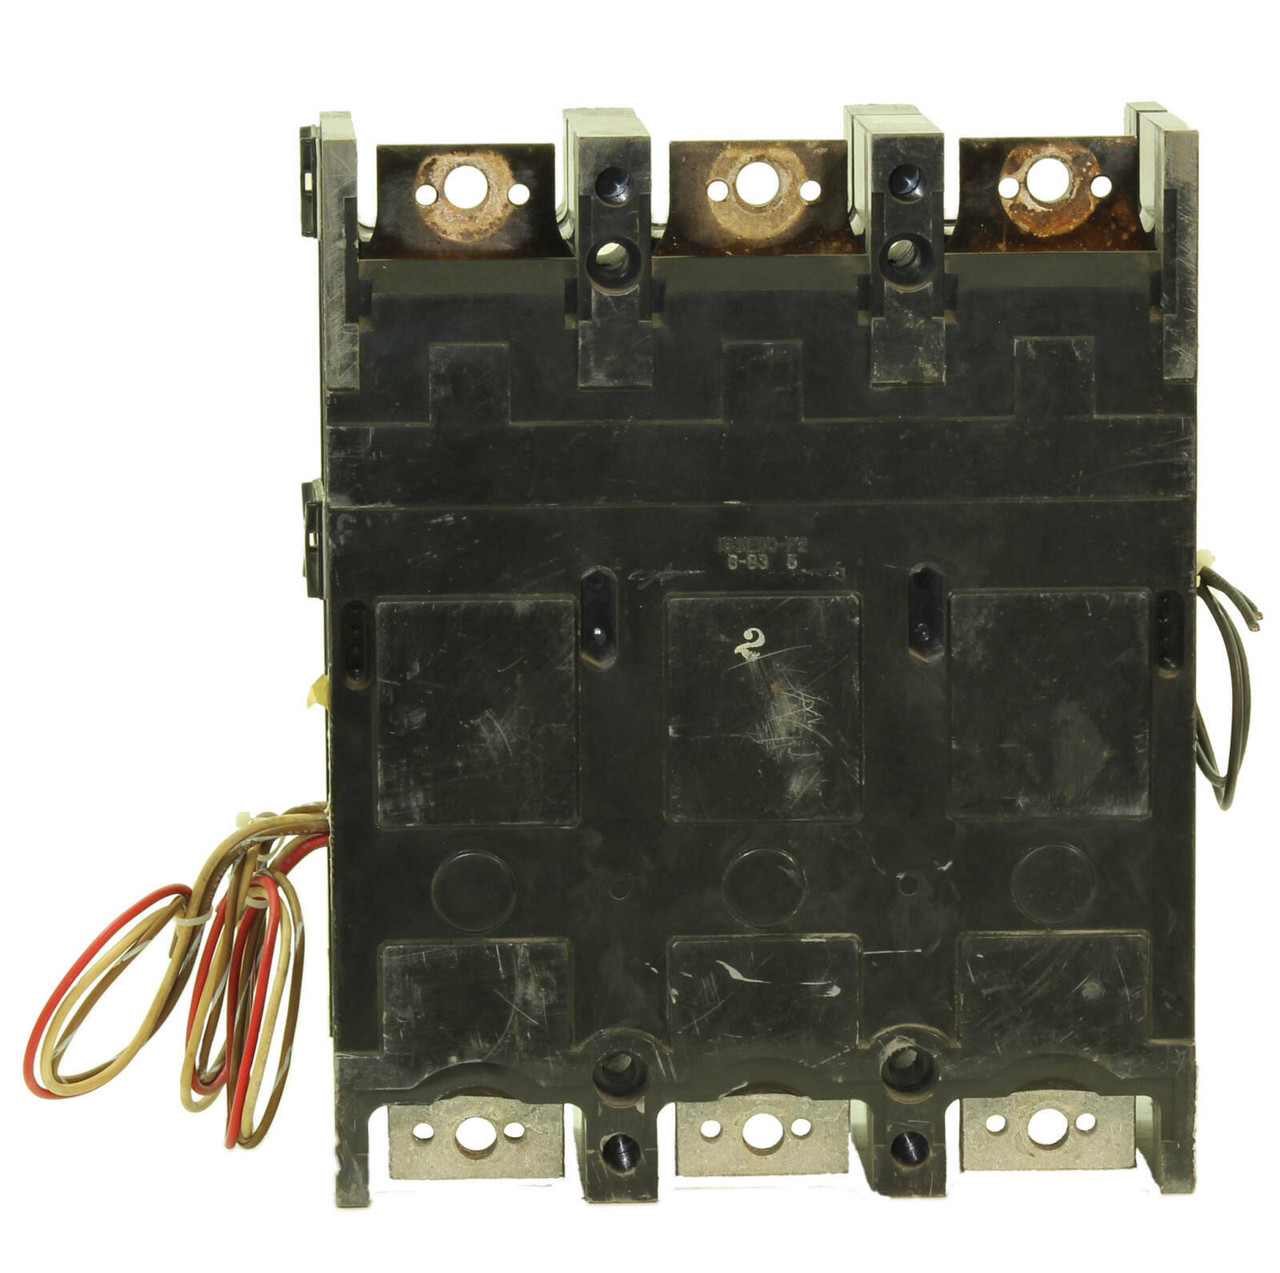 General Electric TJK636Y600 Switch 600A 600V 3P 22KA with 3 Auxiliary Switches, Shunt Trip, NO Lugs